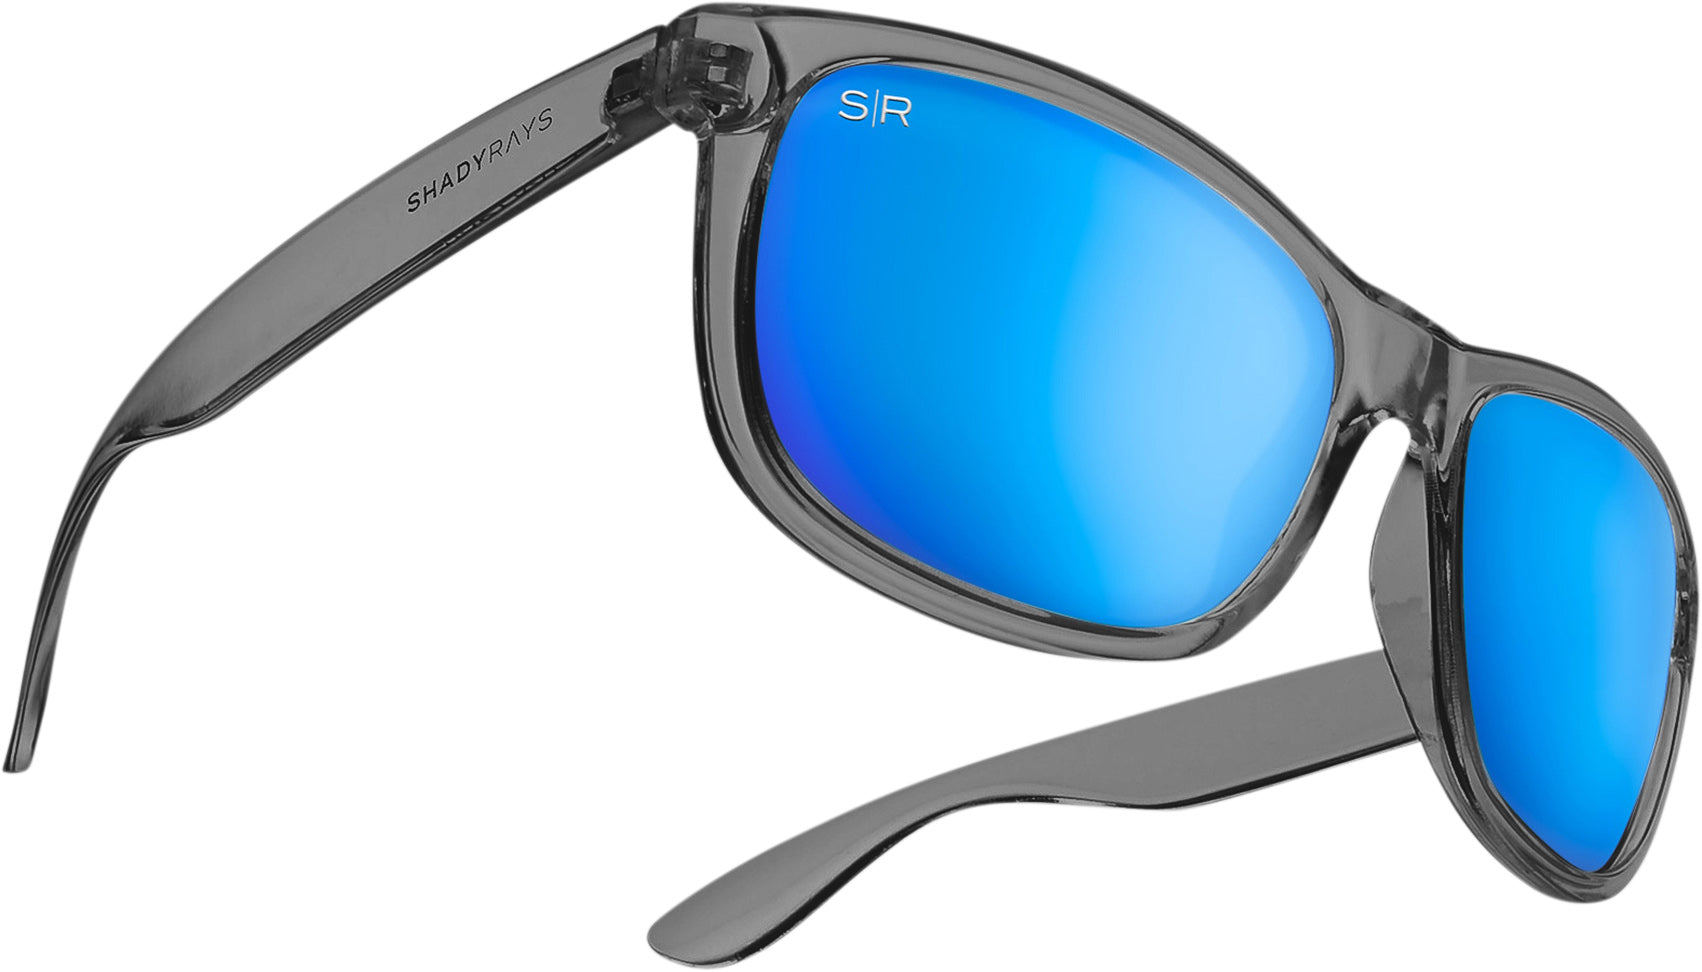 Signature Series - Glacier Smoke Original Polarized Sunglasses | Gloss Sunglasses | Best Christmas Gifts | Gifts for the Holidays | Unique Gifts for